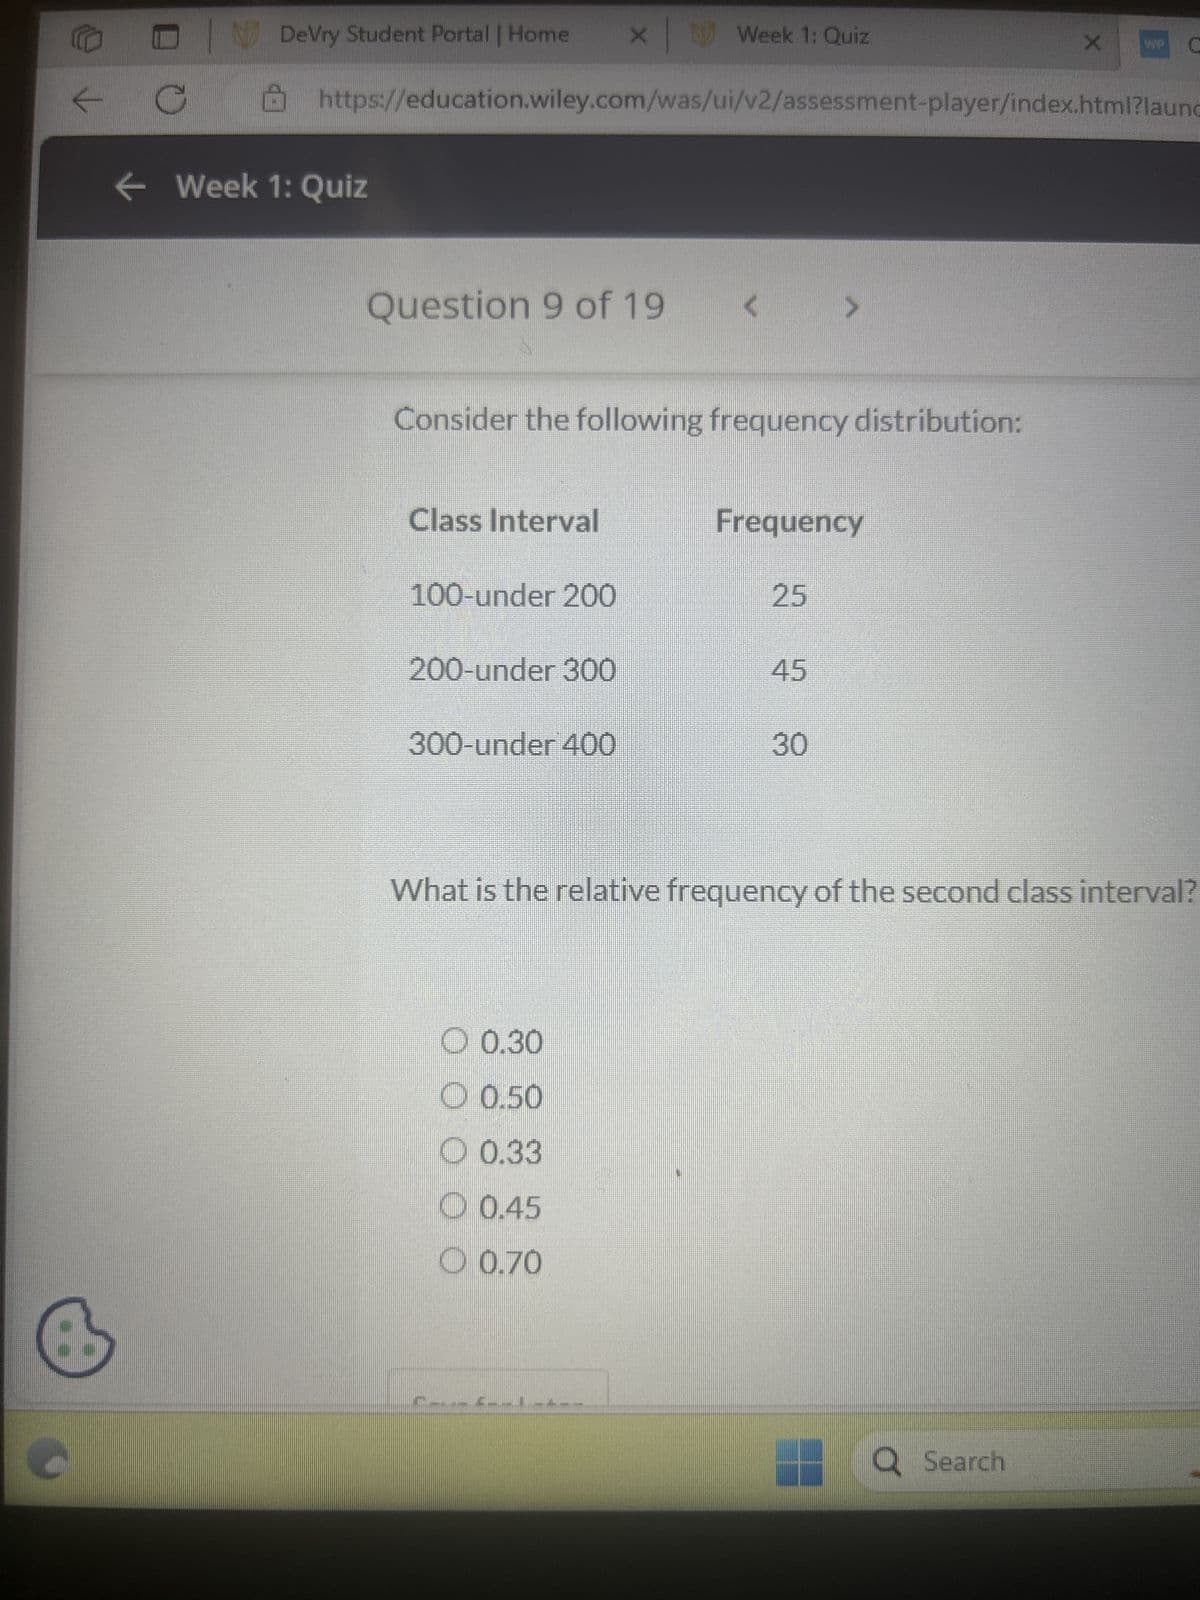 ✓
C
DeVry Student Portal | Home
← Week 1: Quiz
https://education.wiley.com/was/ui/v2/assessment-player/index.html?launc
Question 9 of 19
Class Interval
Consider the following frequency distribution:
100-under 200
x Week
200-under 300
300-under 400
Week 1: Quiz
0.30
0.50
0.33
0.45
0.70
Frequency
25
45
30
What is the relative frequency of the second class interval?
Q Search